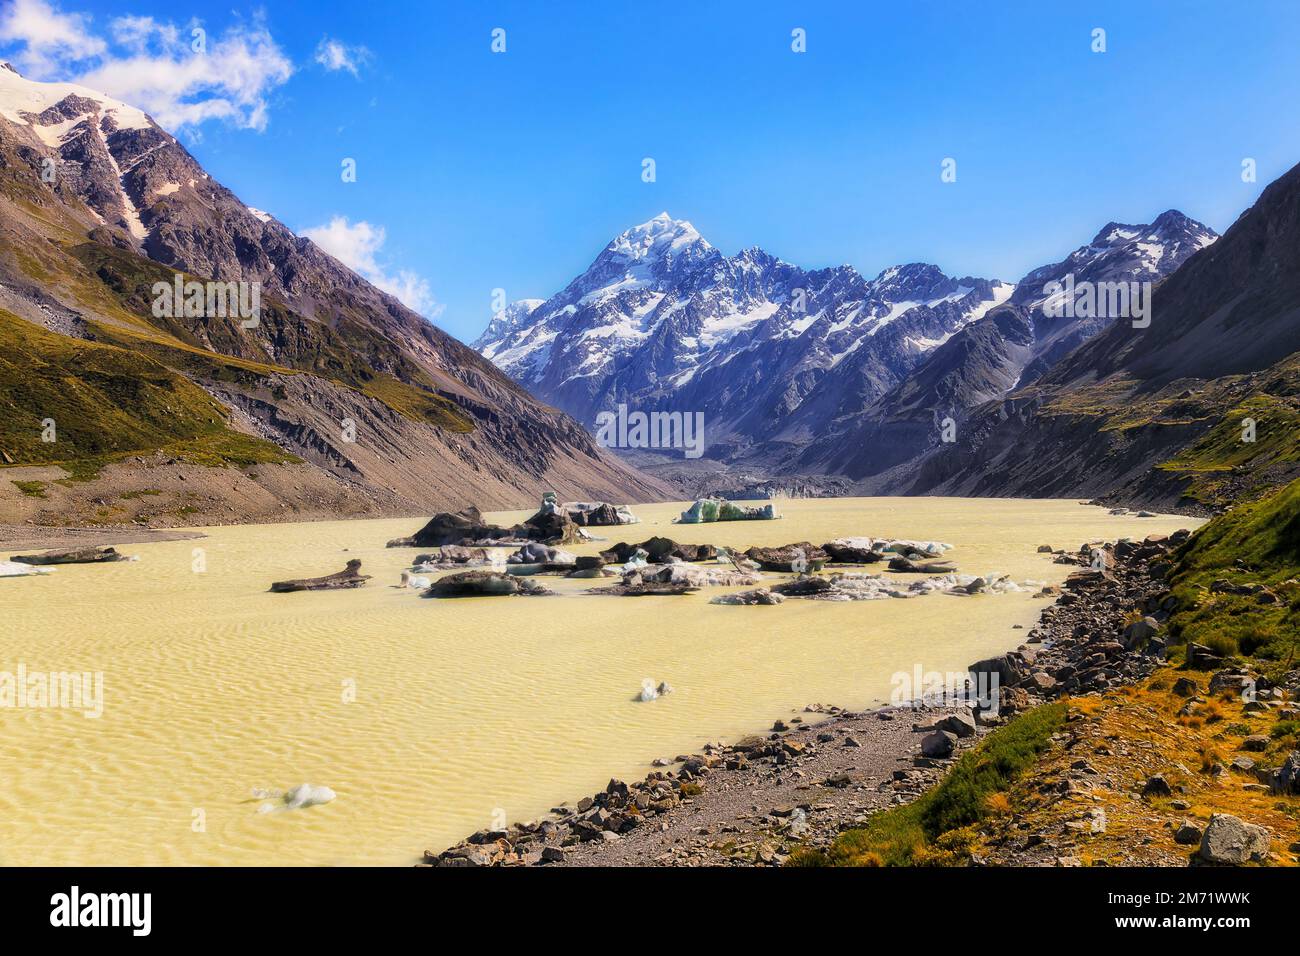 Observation point on Hooker lake to Mt Cook in mountains of New Zealand - scenic landscape. Stock Photo